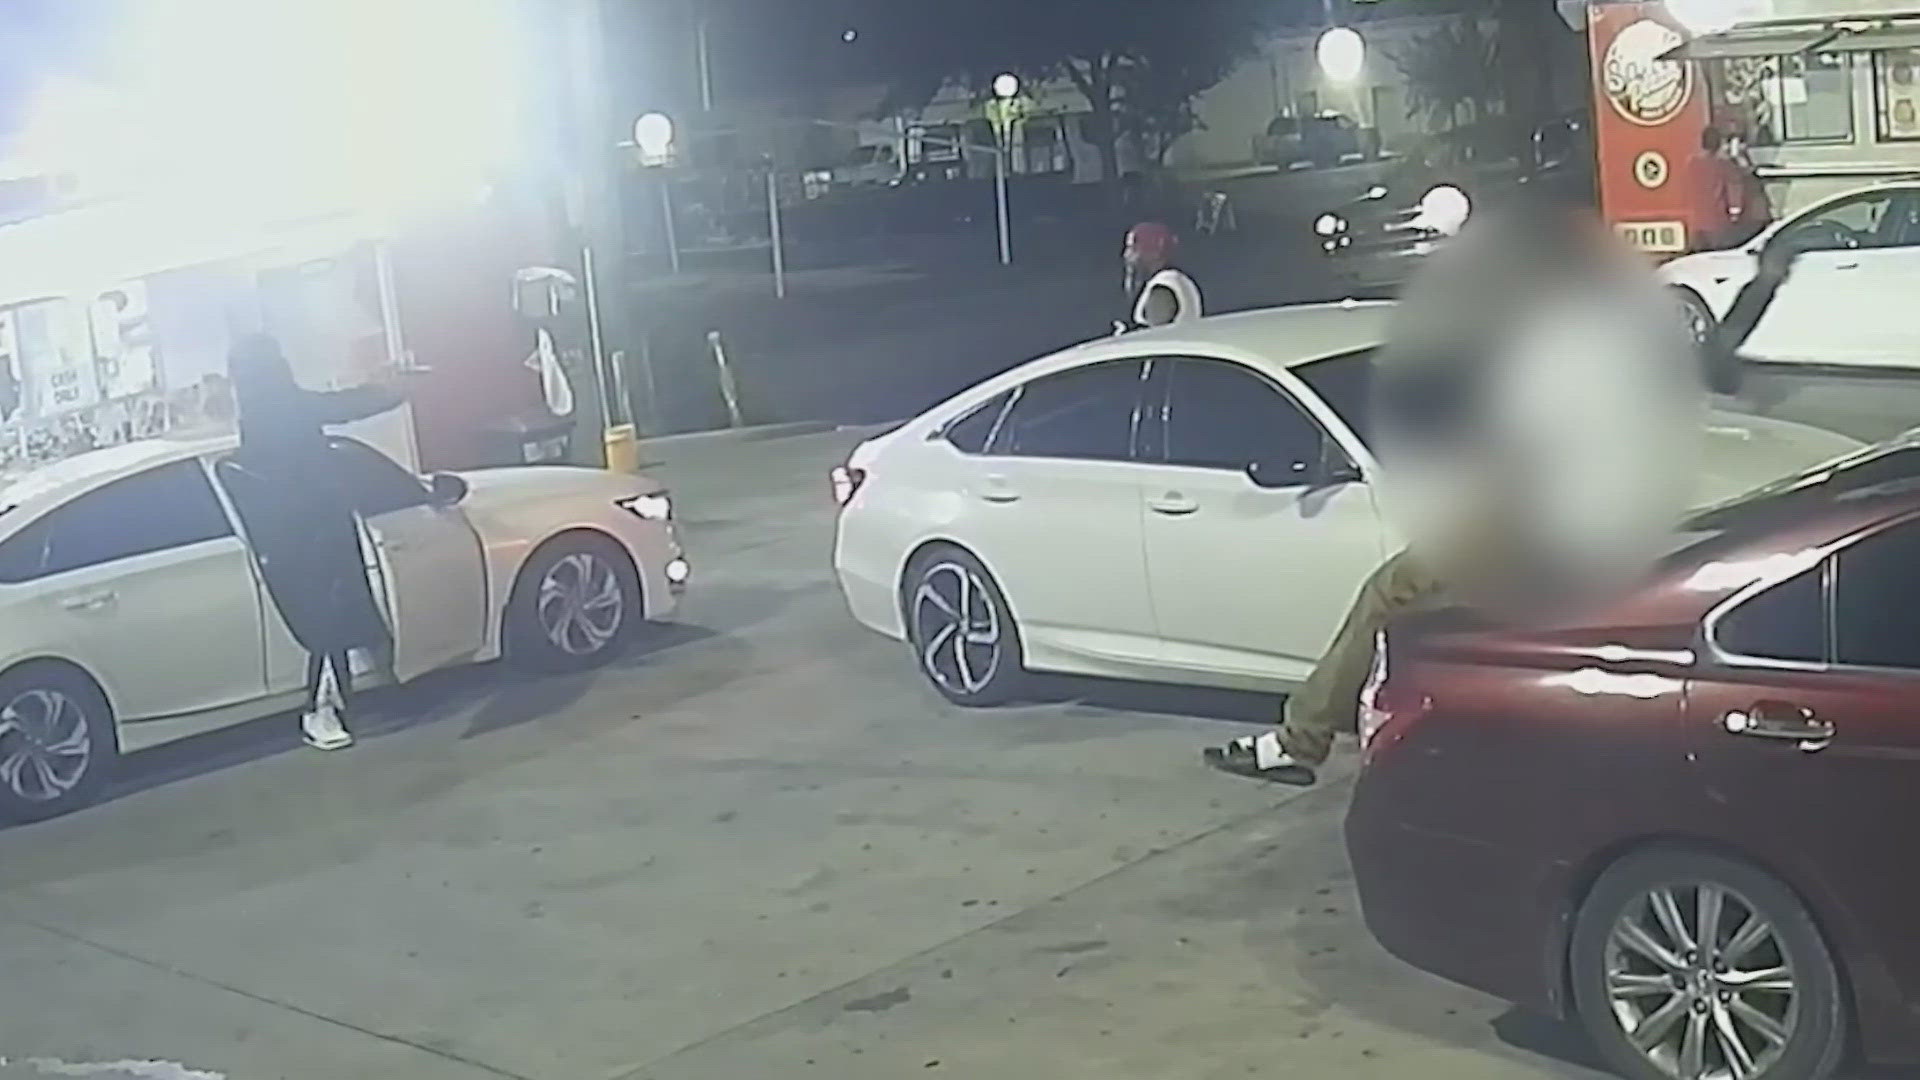 The Houston Police Department said the man was getting food when two people wearing masks pulled up in a white Mercedes and started shooting.